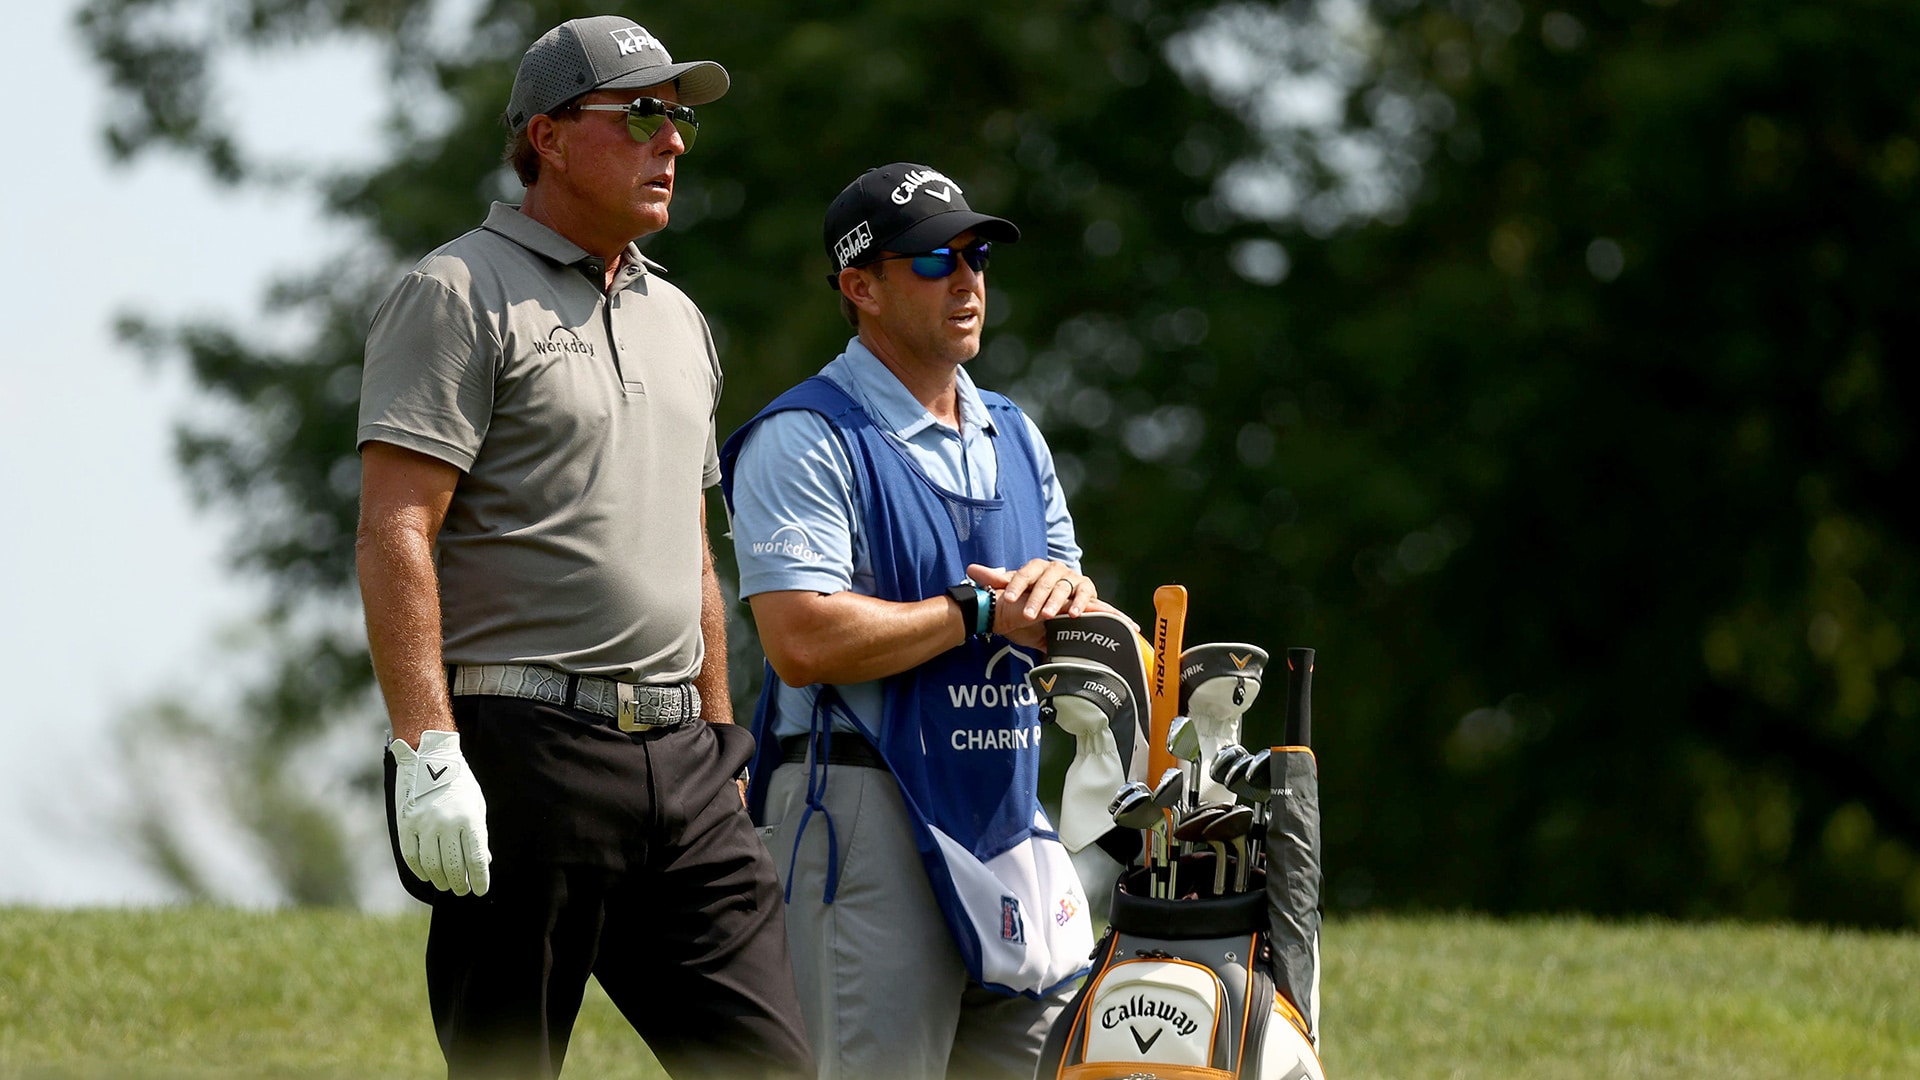 Phil Mickelson (73) lets hot start slip away at Workday Charity Open